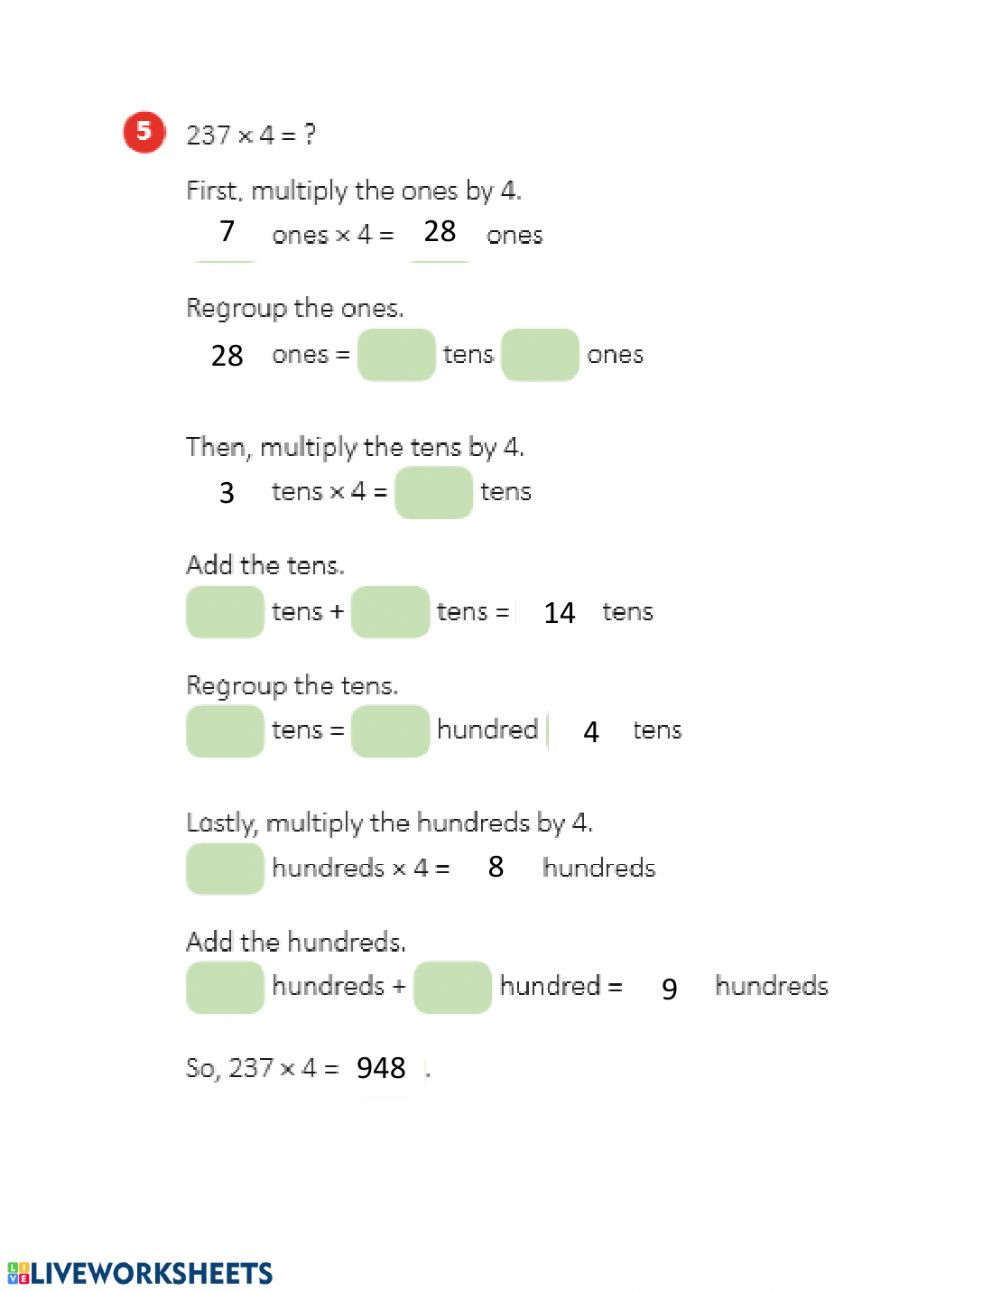 Ones Tens Hundreds Worksheet Multiplication with Regrouping In Es Tens and Hundreds